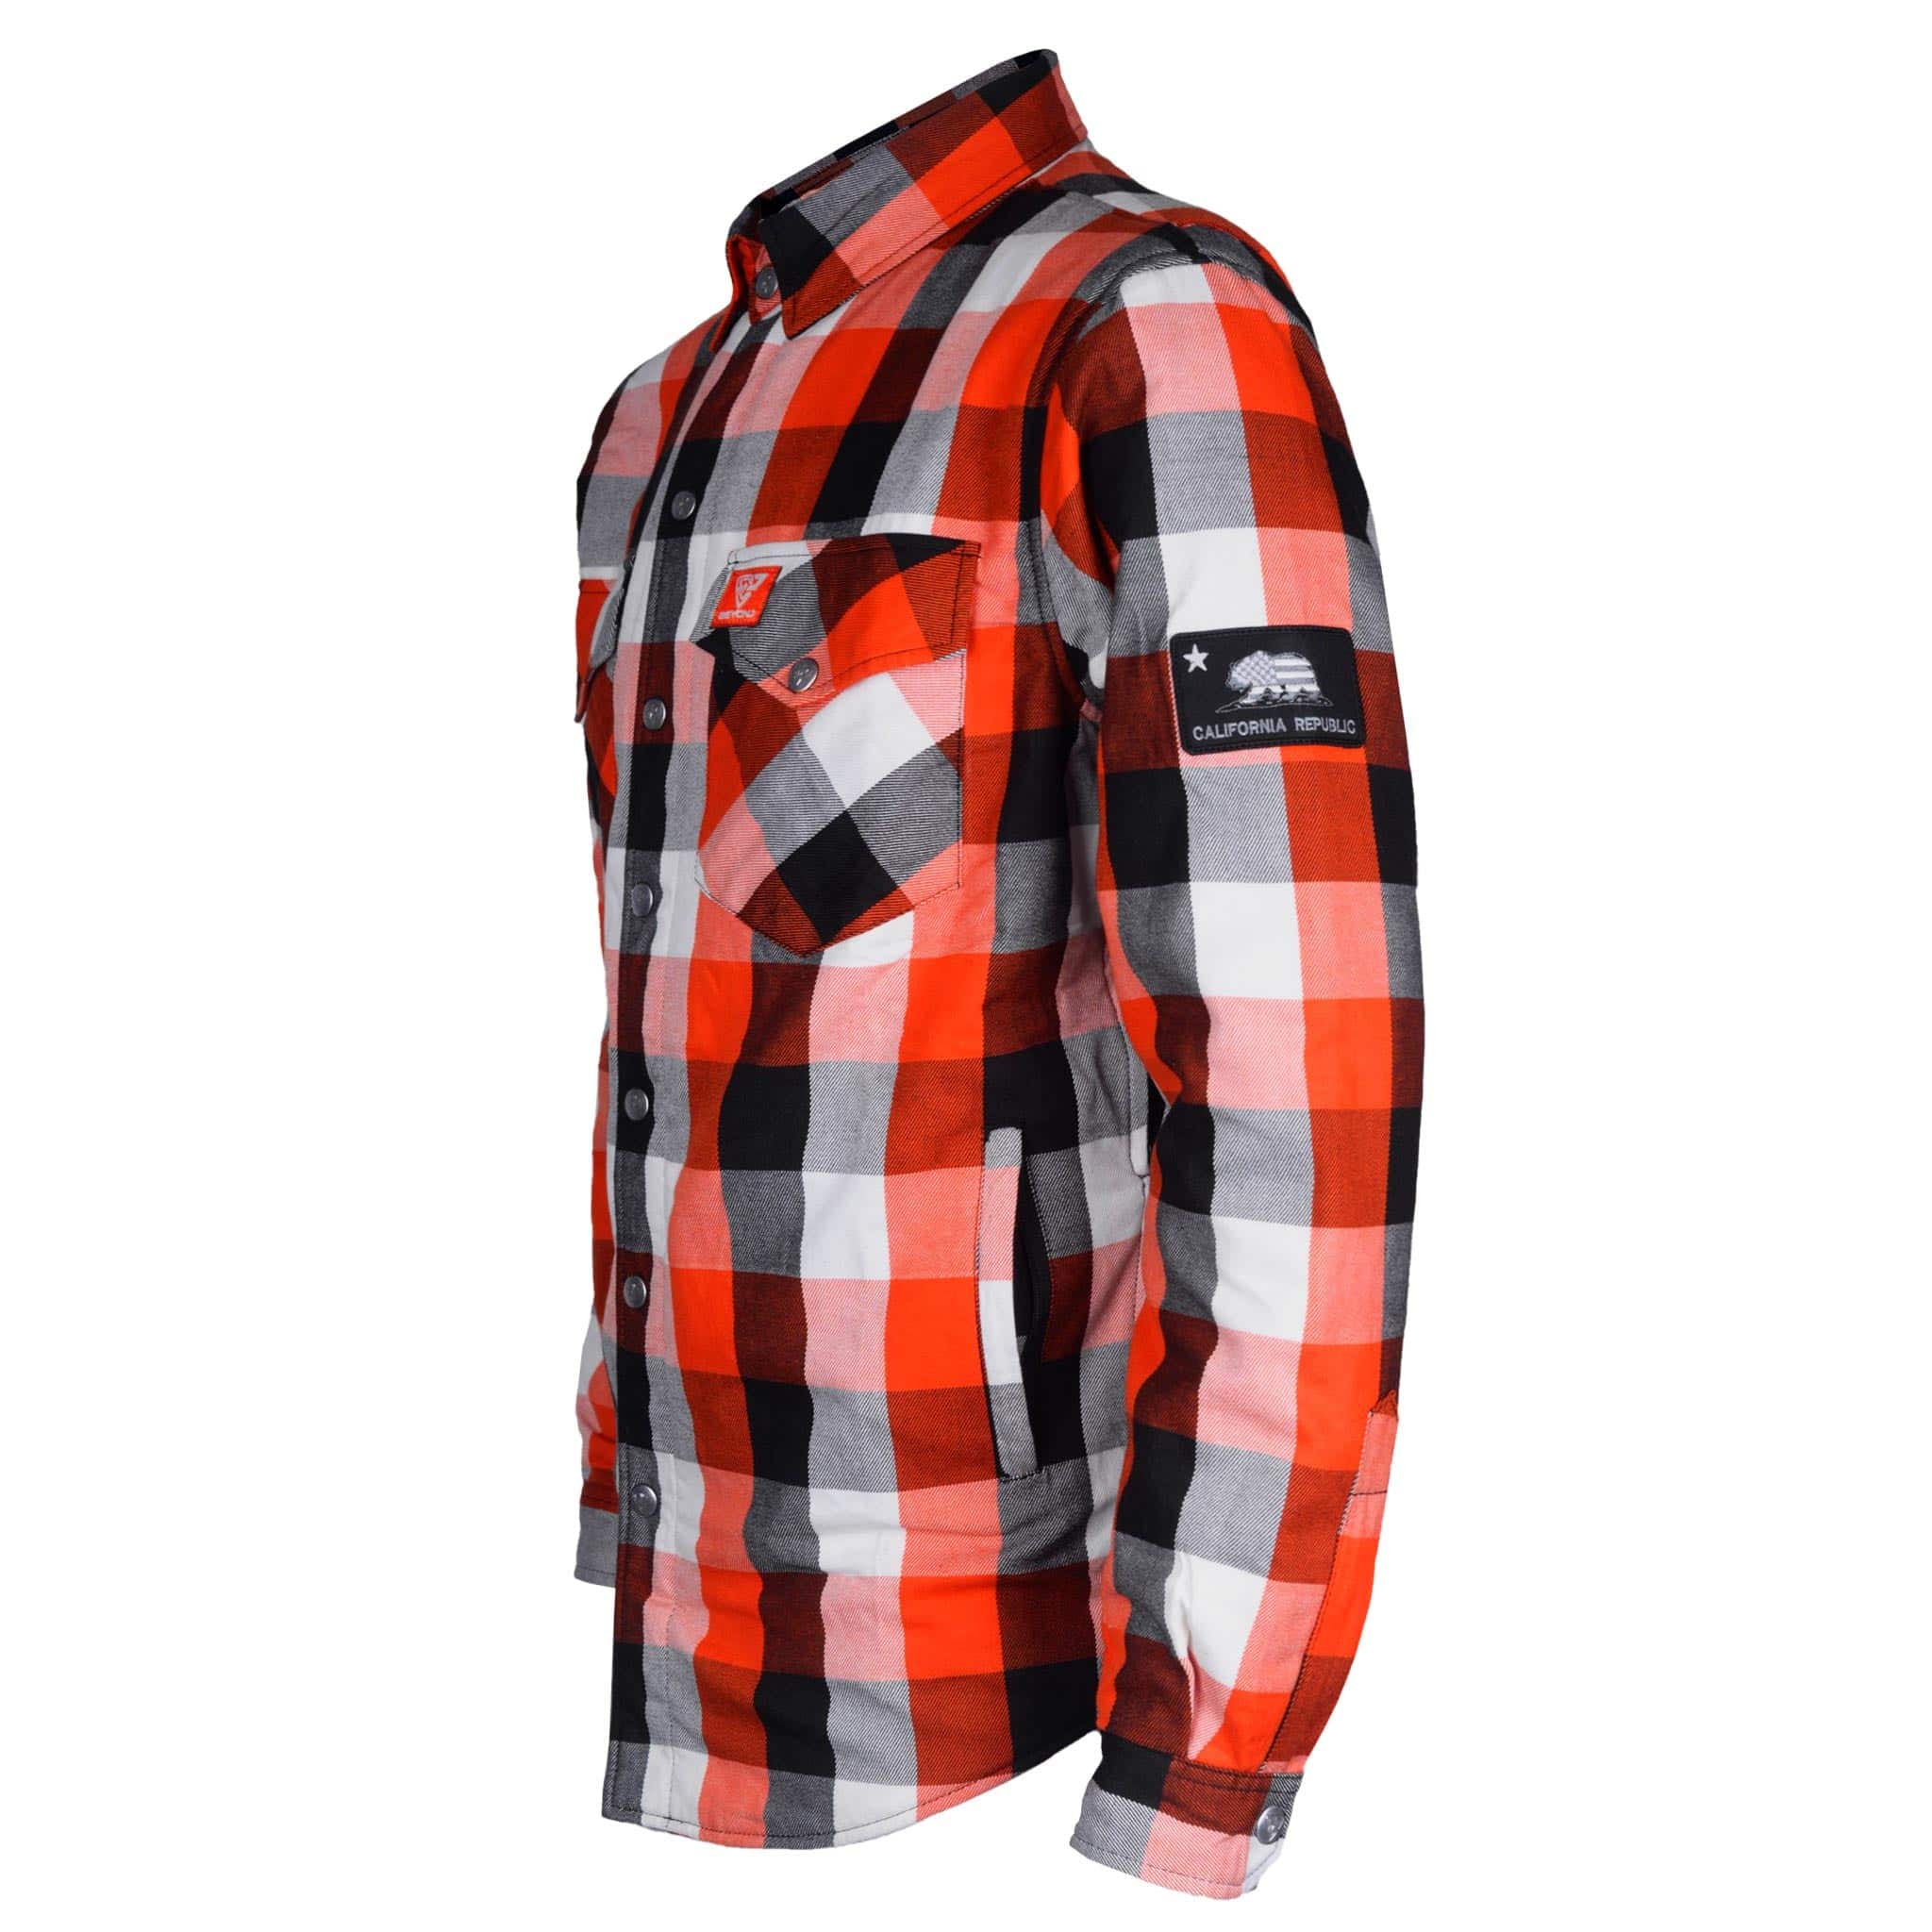 Protective Flannel Shirt "American Dream"  - Red, Black, White Checkered with Pads